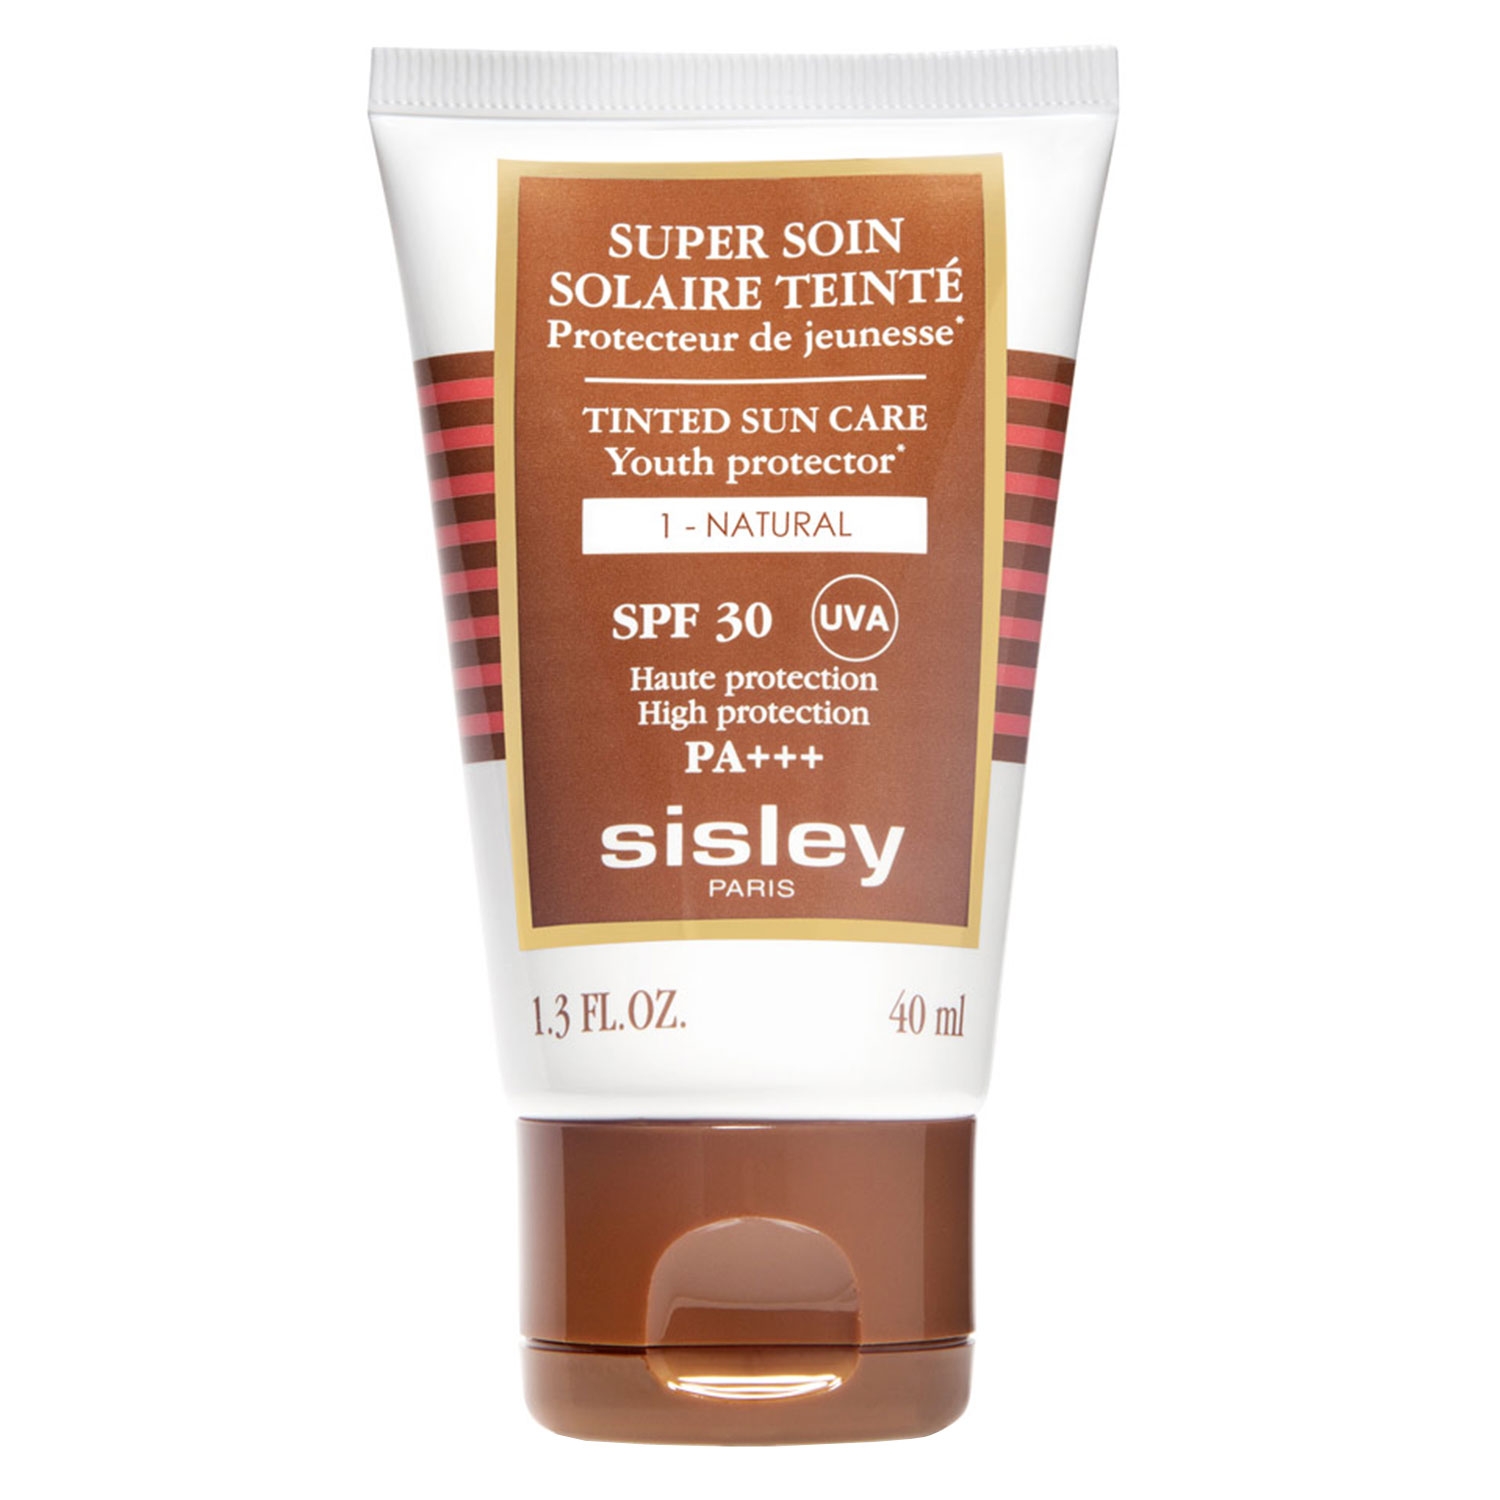 Product image from Super Soin - Solaire Teinté Natural SPF30